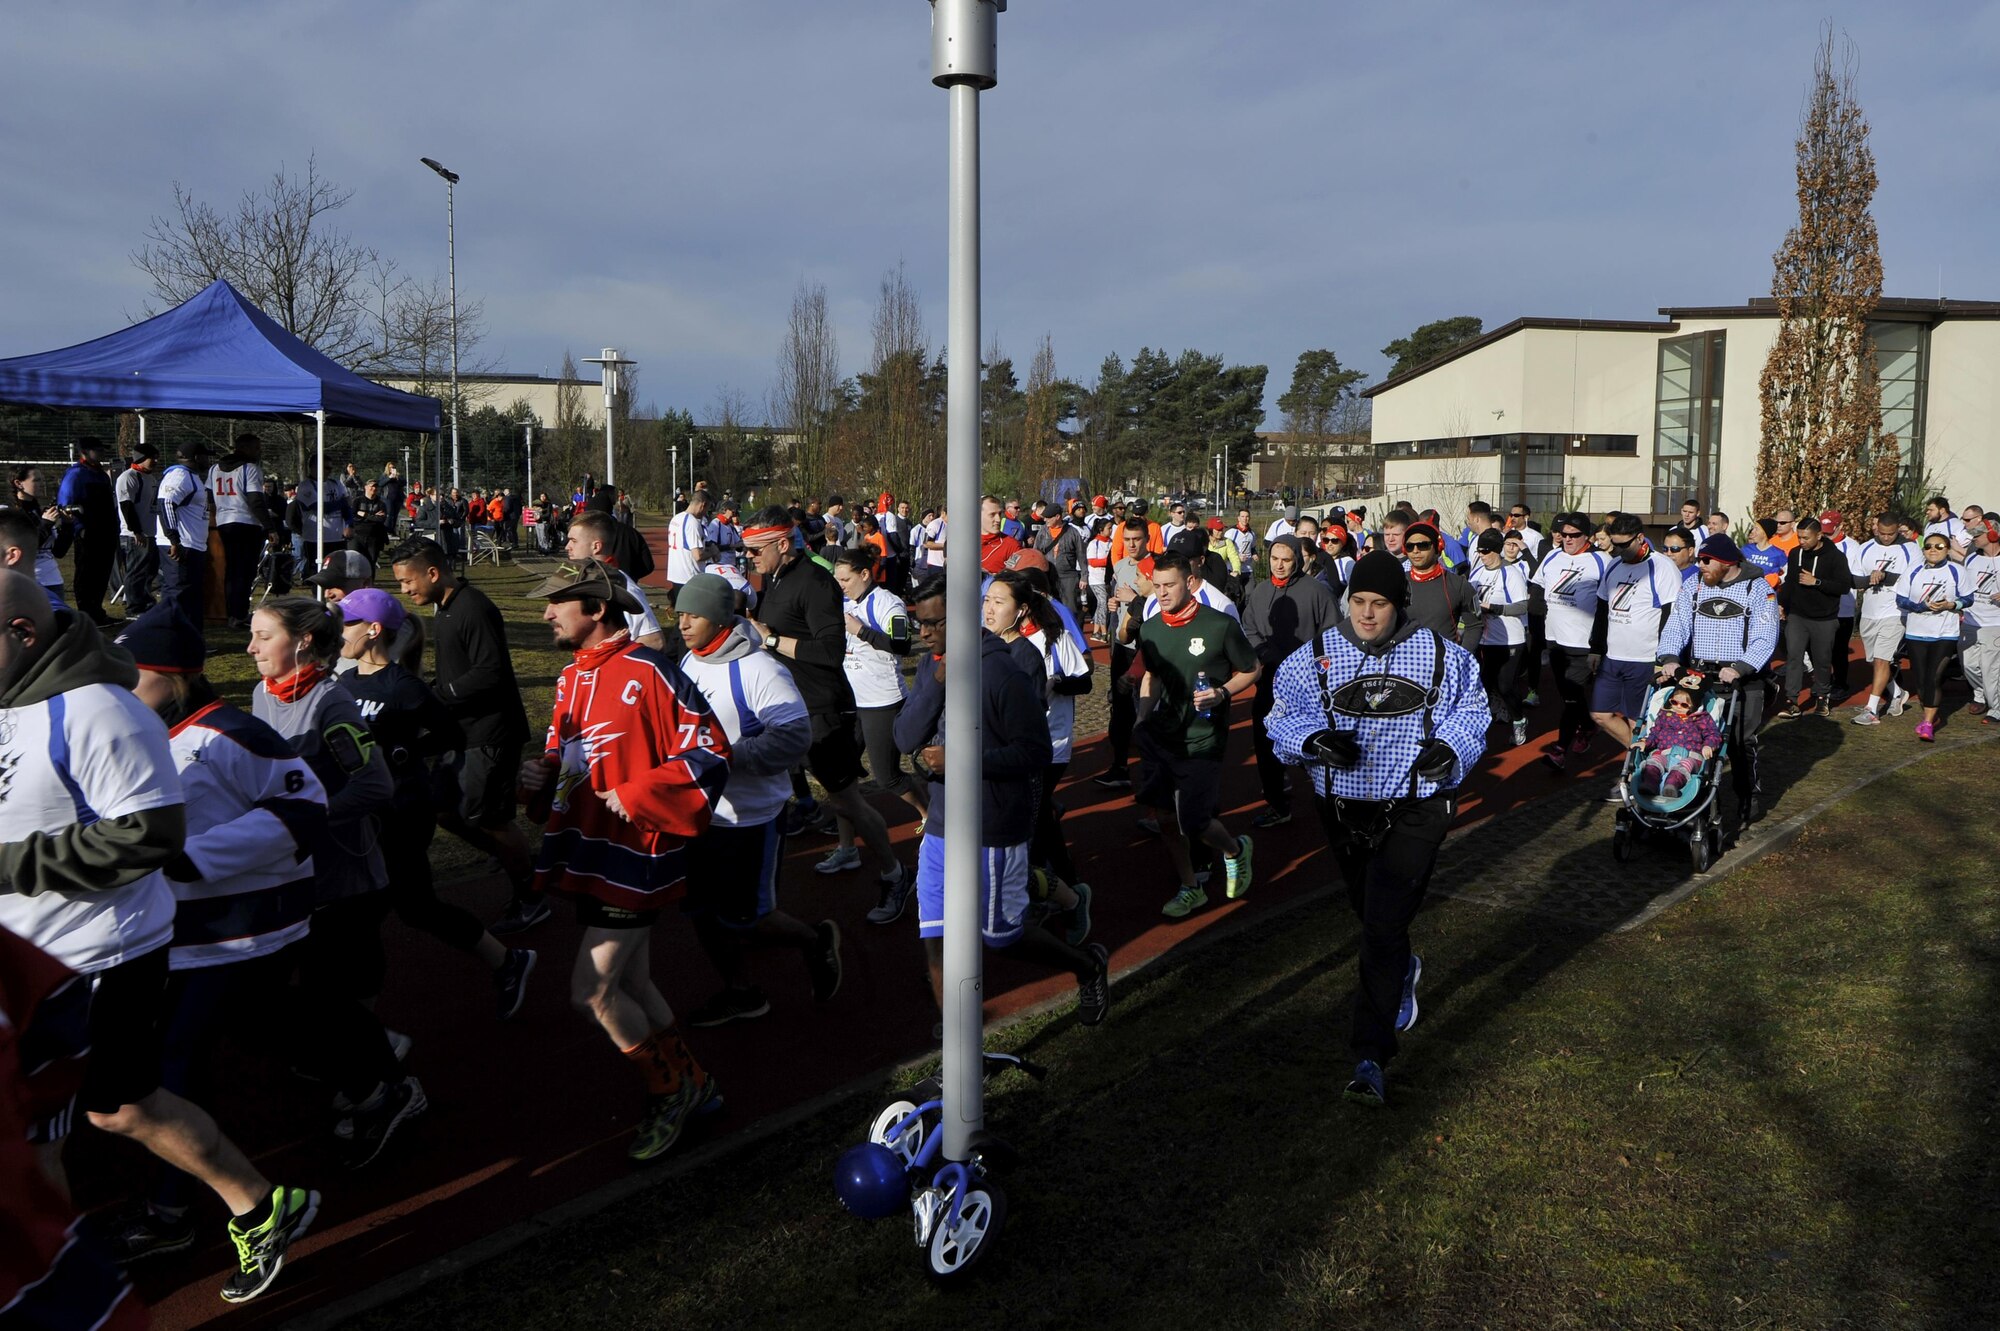 The starting horn sounds and runners take off as the 6th annual memorial 5K in honor of Airman 1st Class Zachary Cuddeback begins on Ramstein Air Base, Germany, Mar. 4, 2017. Airman Cuddeback’s life was taken during a routine air crew run at Frankfurt International Airport in March of 2011. (U.S. Air Force photo by Airman 1st Class D. Blake Browning)